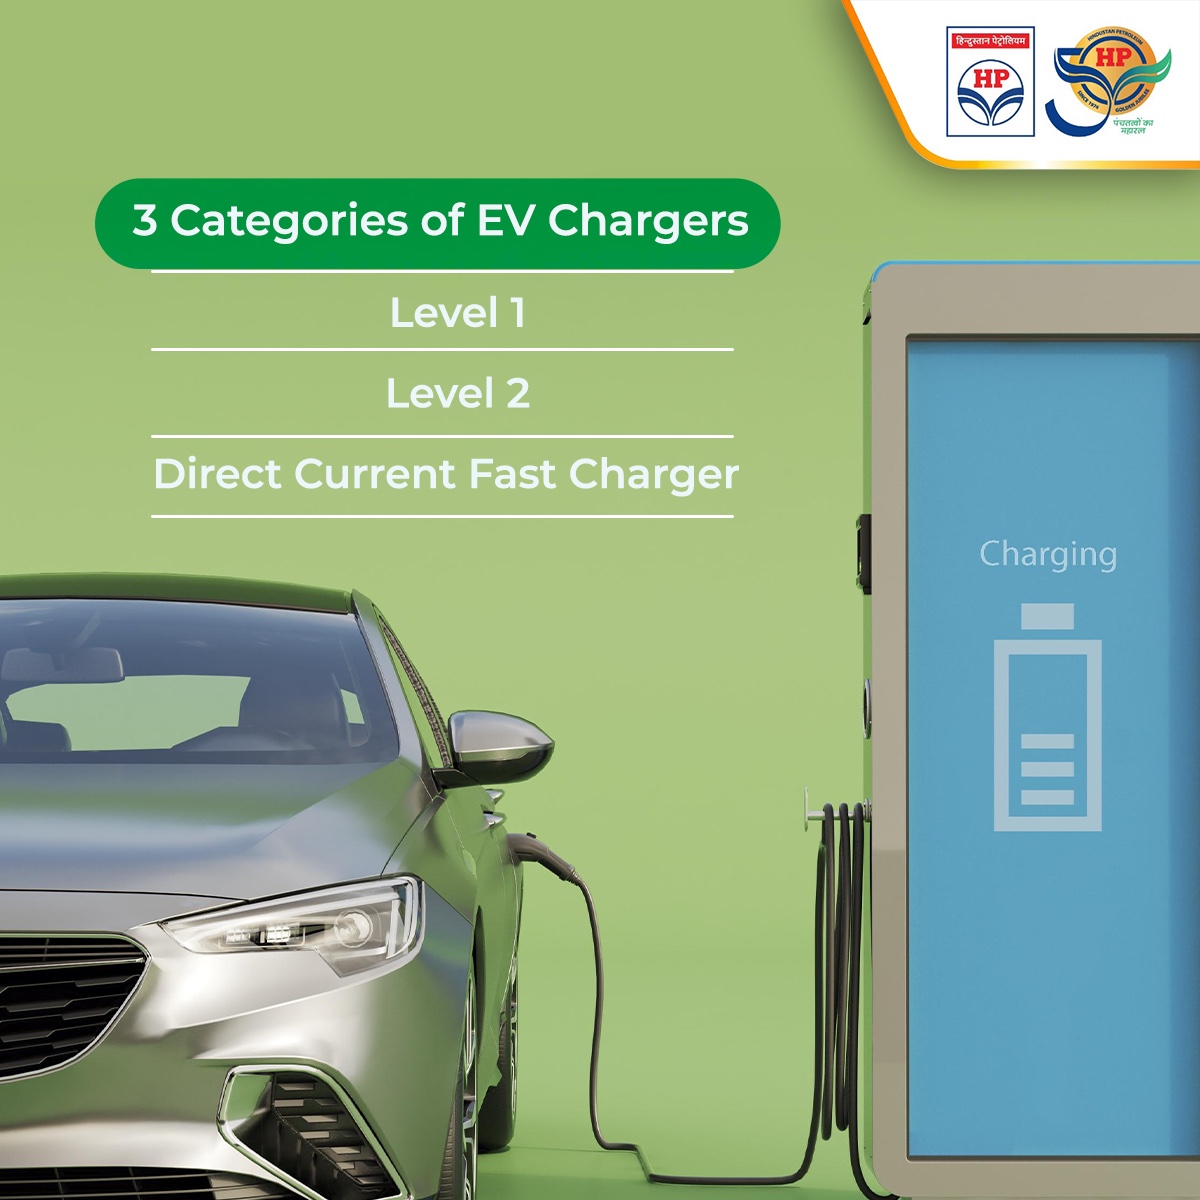 Based on Input Voltage, Power Output, Charging Speed, Equipment and Installation Cost, EV Power Intake, EV chargers are classified into three categories: Level 1, Level 2 and direct current (DC) fast chargers. 

#EVChargers #HPCL #DeliveringHappiness #HPTowardsGoldenHorizon